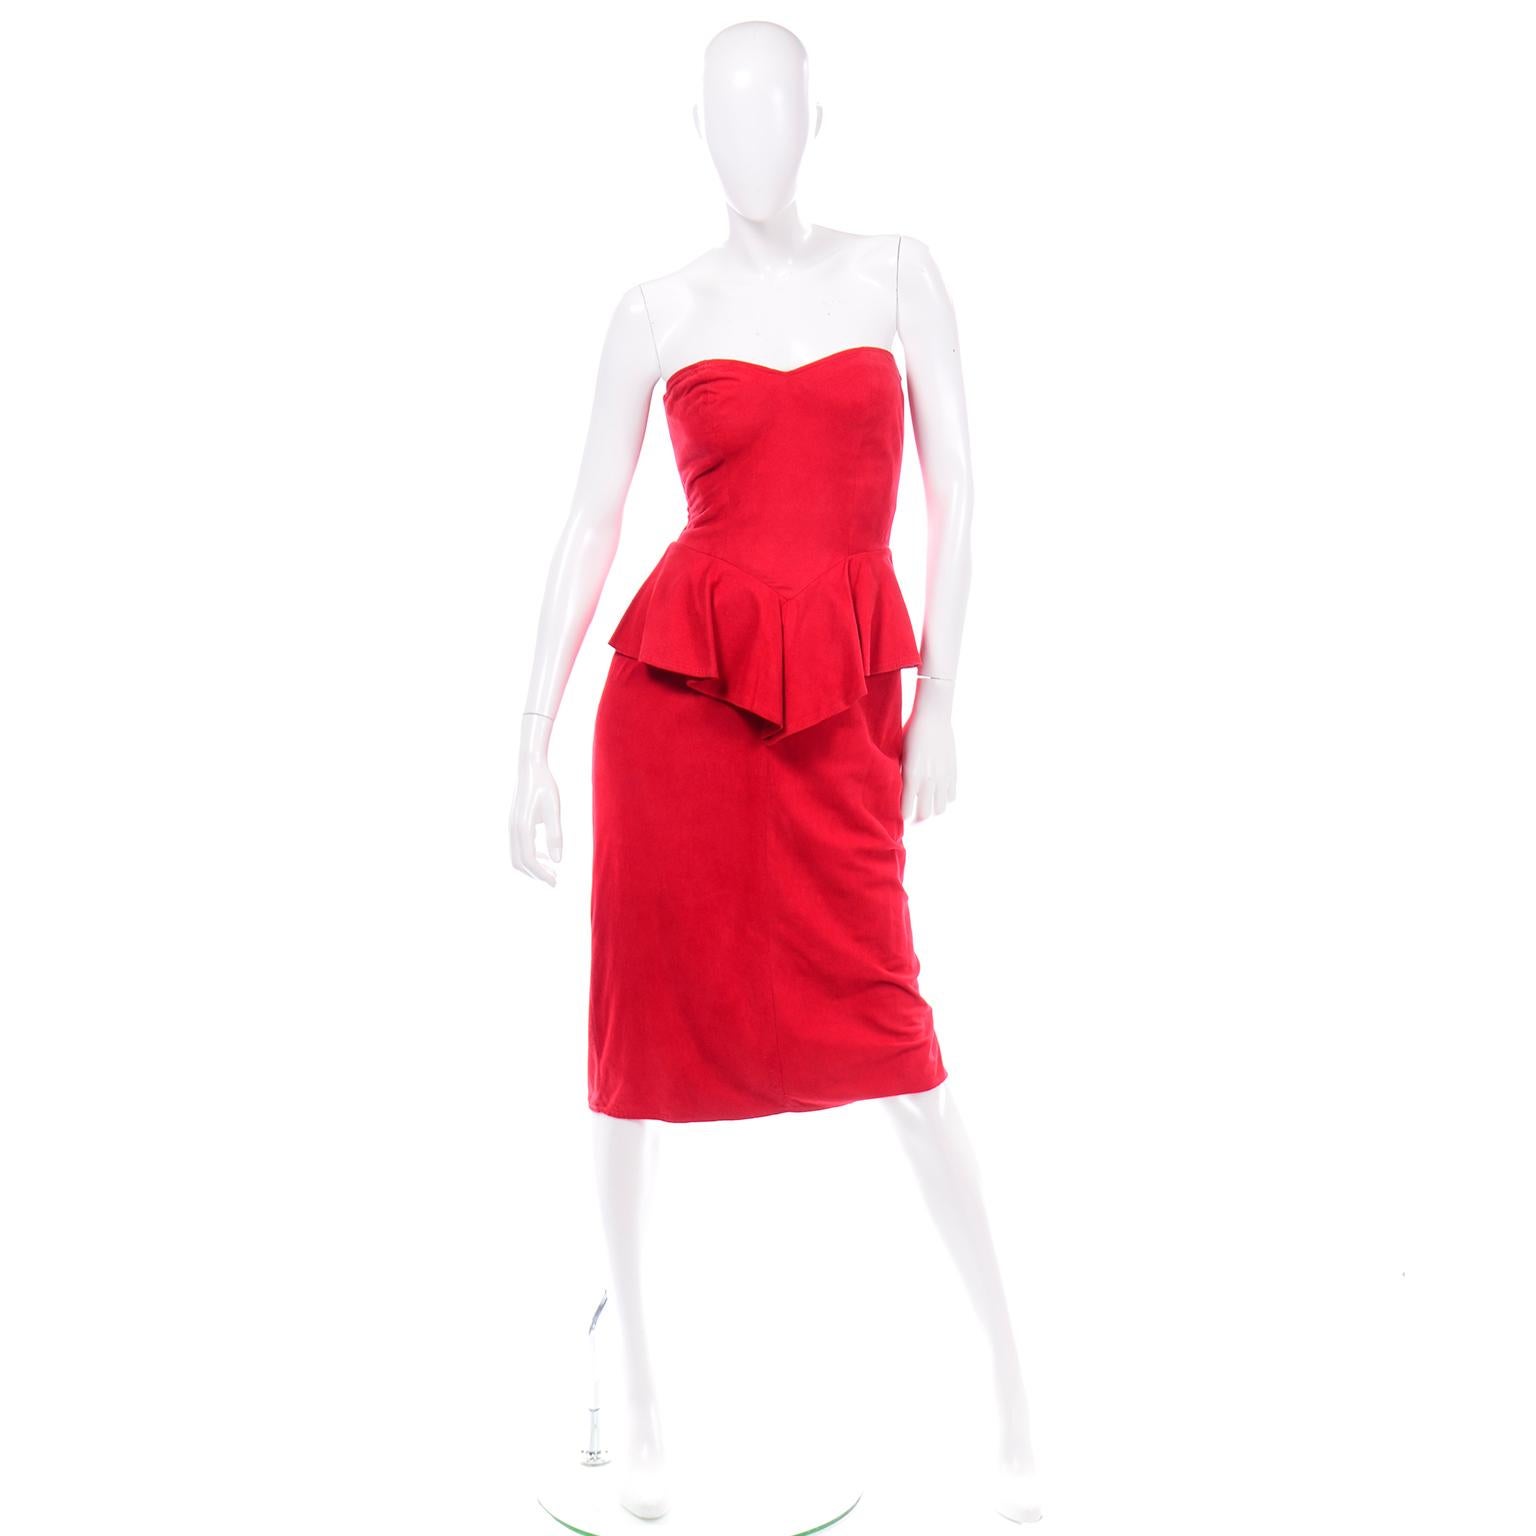 This is such a fun vintage red dress! This Vakko suede peplum evening dress has a sweetheart bust and a pointed peplum at the waist. .The dress is fully lined and there is a back metal zipper for closure and back center slit.  The back band has some